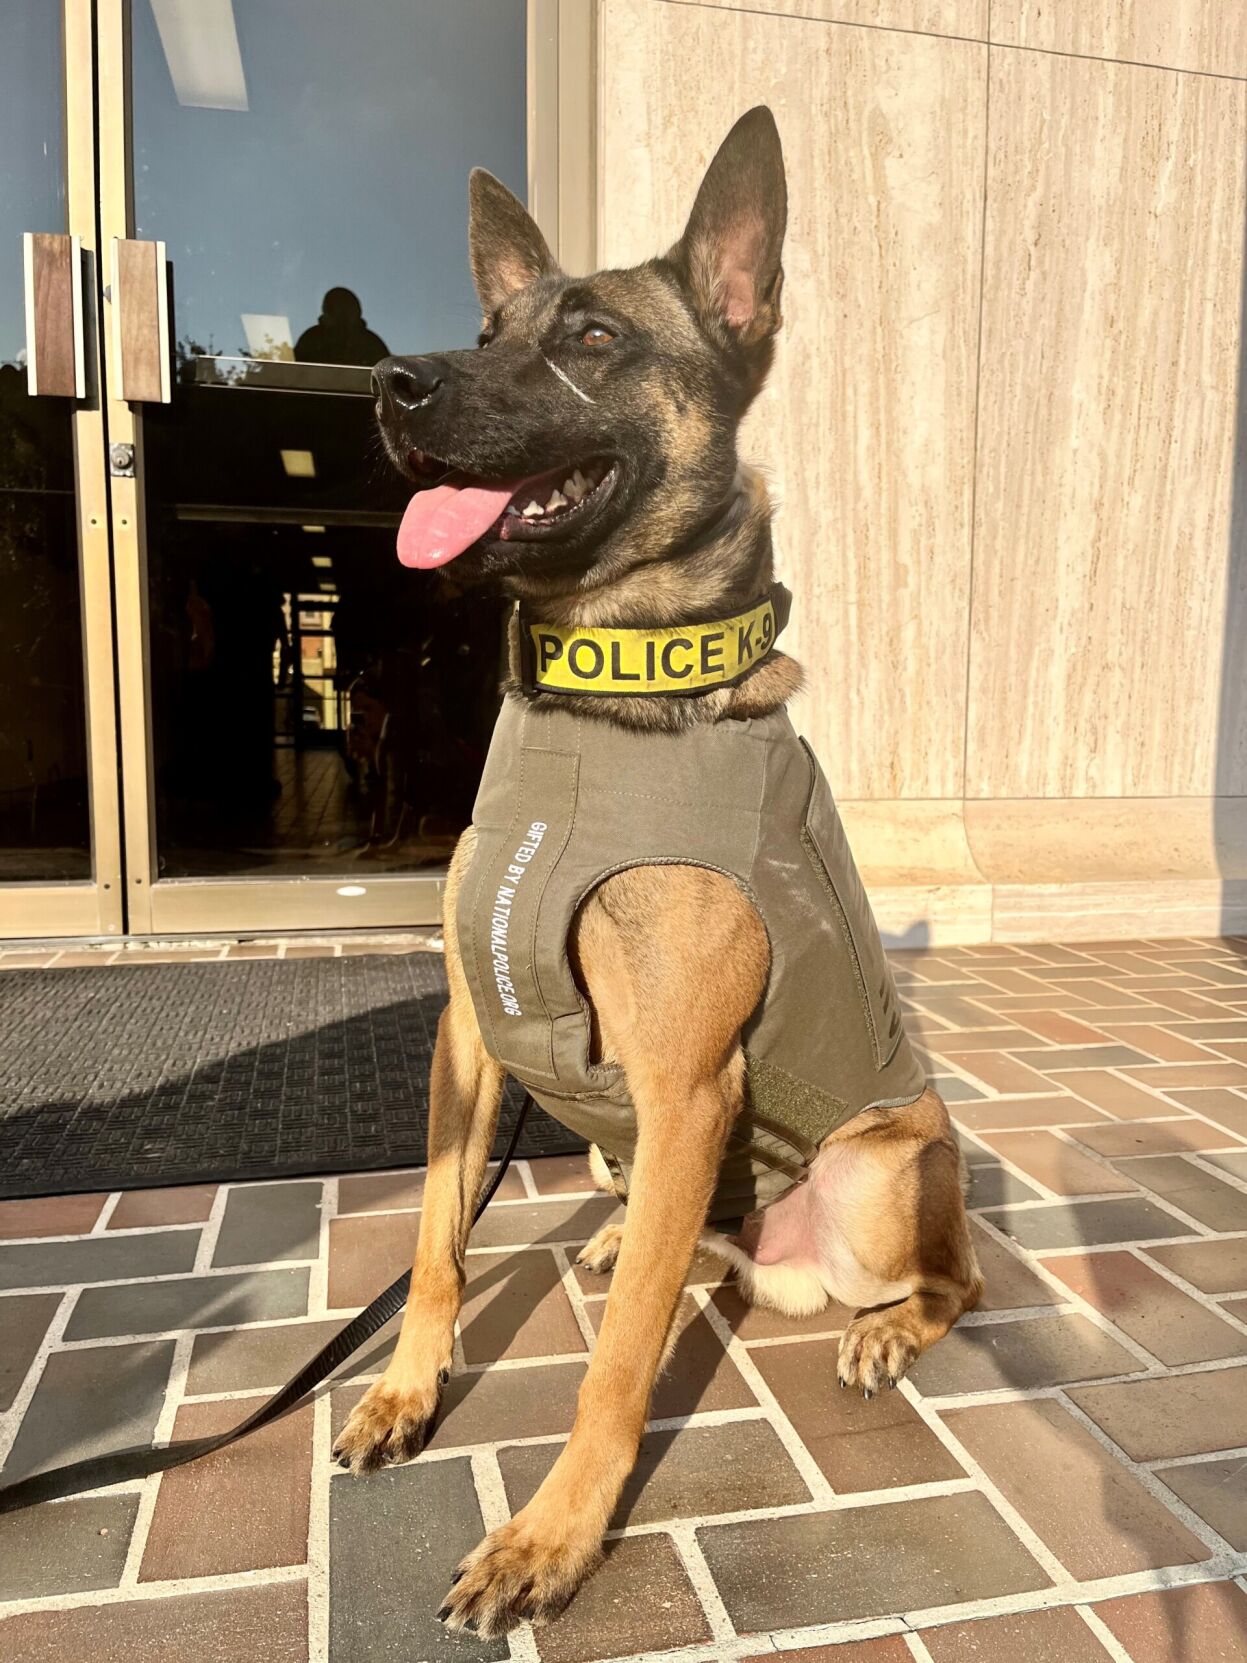 K9 is gifted new body armor